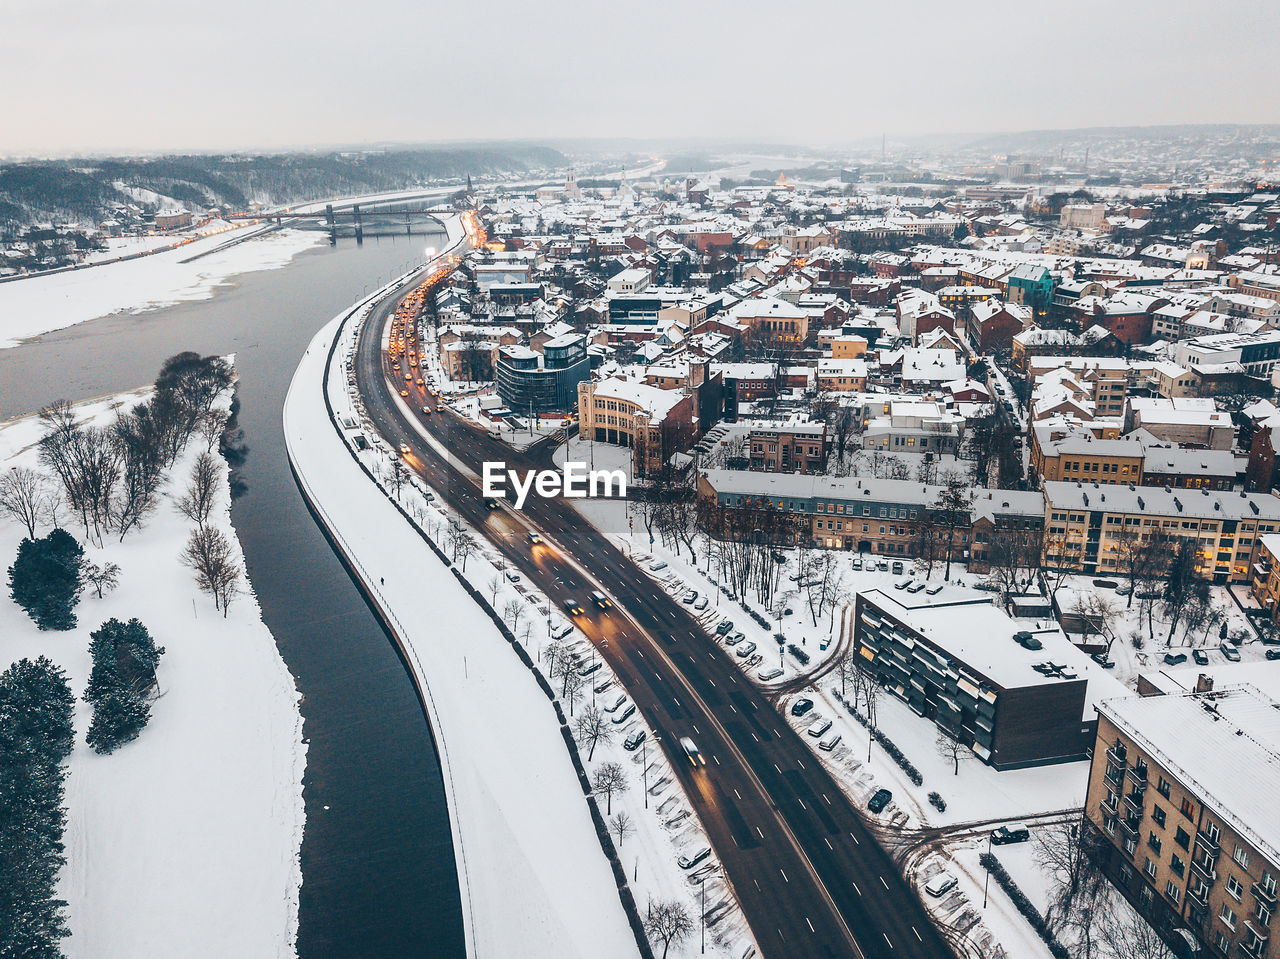 HIGH ANGLE VIEW OF RIVER AMIDST CITY DURING WINTER